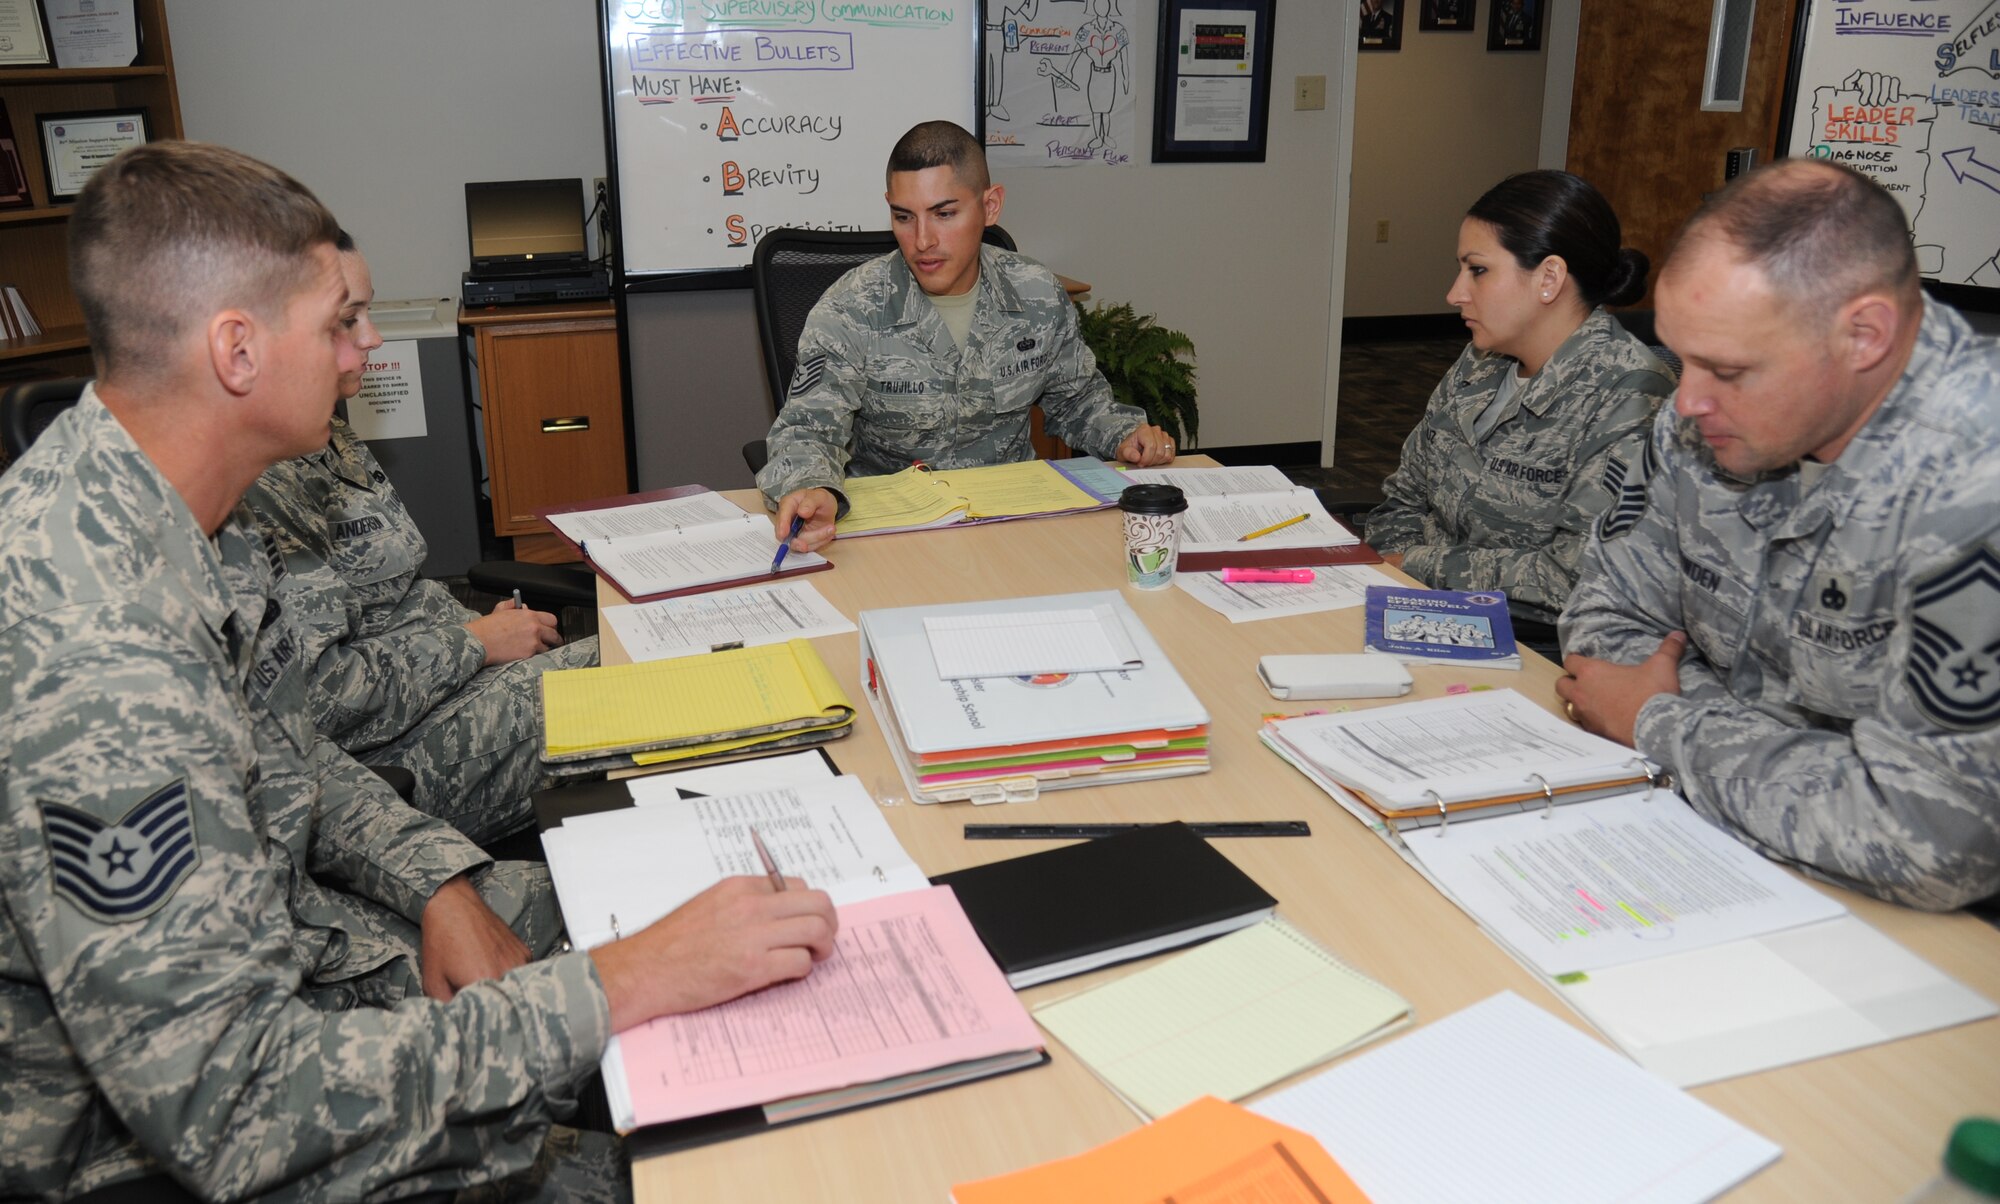 Tech. Sgt. Alberto Trujillo, 81st Force Support Squadron Airman Leadership School instructor, reviews lesson plans with fellow instructors July 15, 2014, at the ALS building, Keesler Air Force Base, Miss.  Trujillo entered the Air Force as a cyber transport specialist and has been an instructor at the Airman Leadership School for four years, where he currently teaches leadership skills to Airmen.  (U.S. Air Force photo by Kemberly Groue)